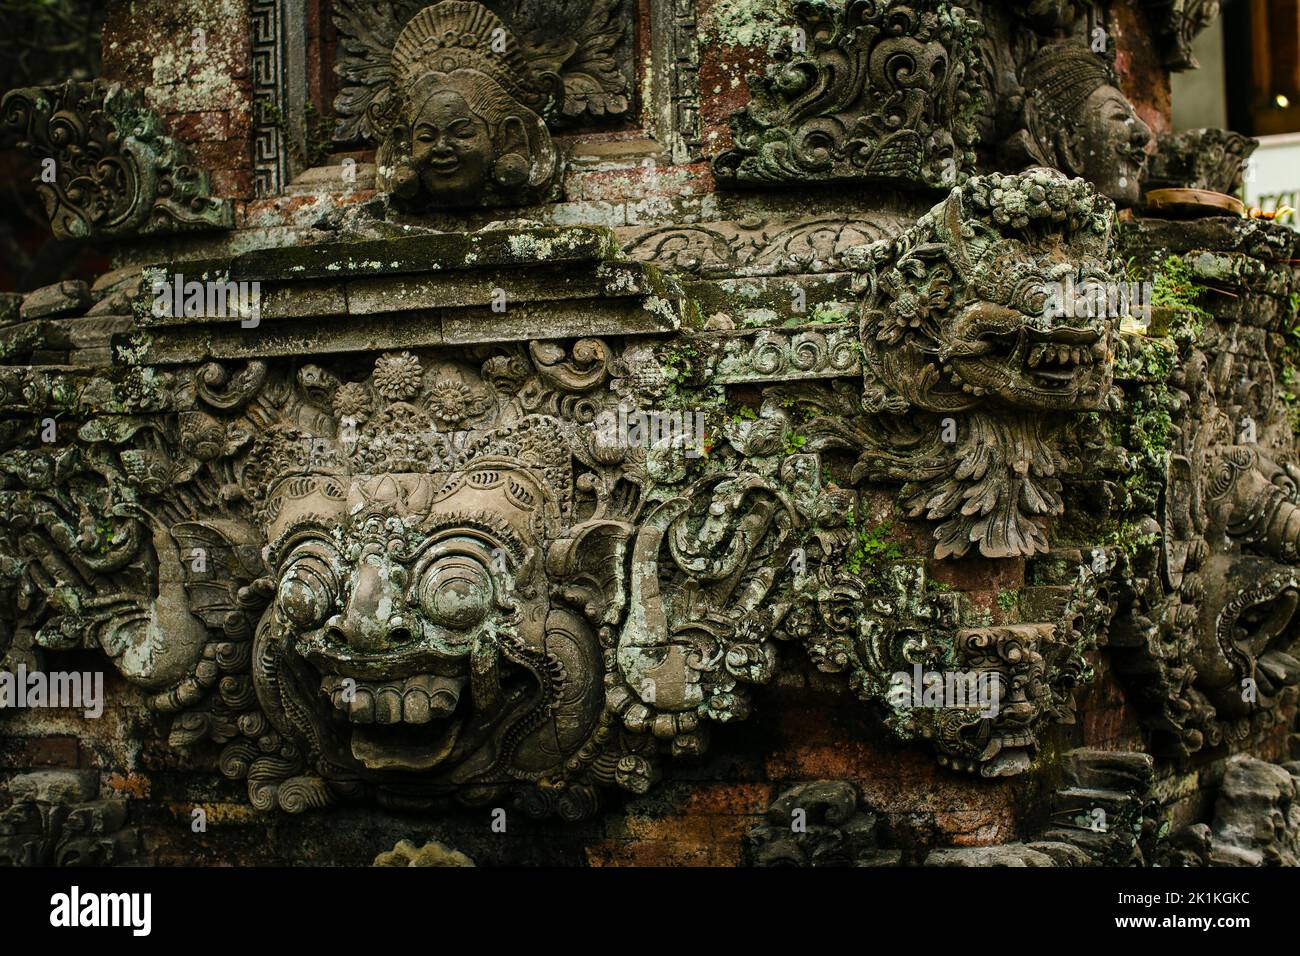 A traditional demons carved in stone on the island of Bali, Indonesia. Stock Photo